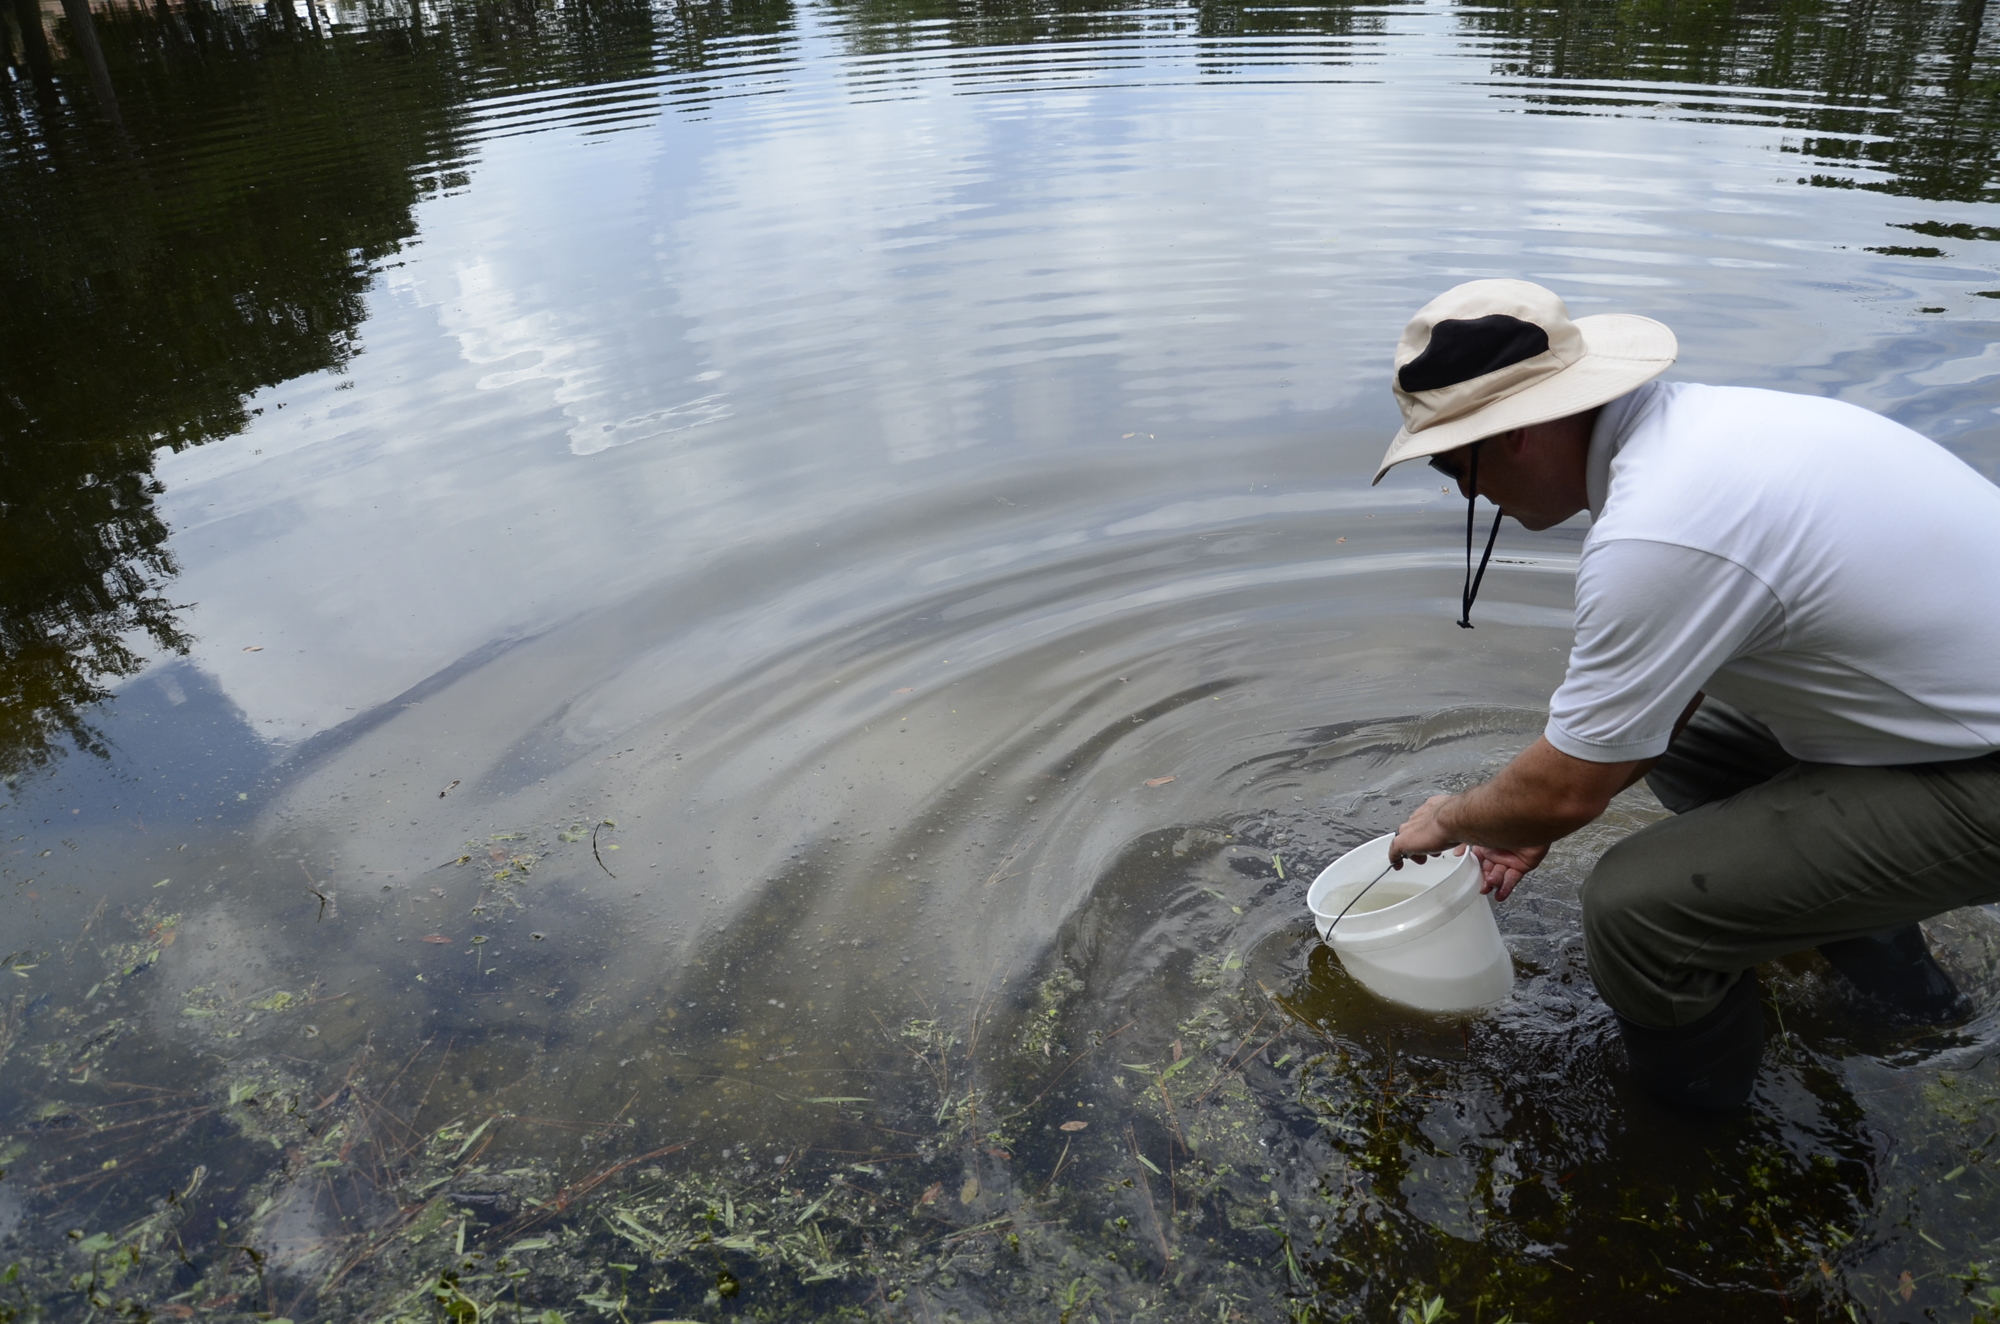 Josh McGarry, district manager for Aquatic Services, slowly releases the carp into Tara Preserve's pond, number 15.